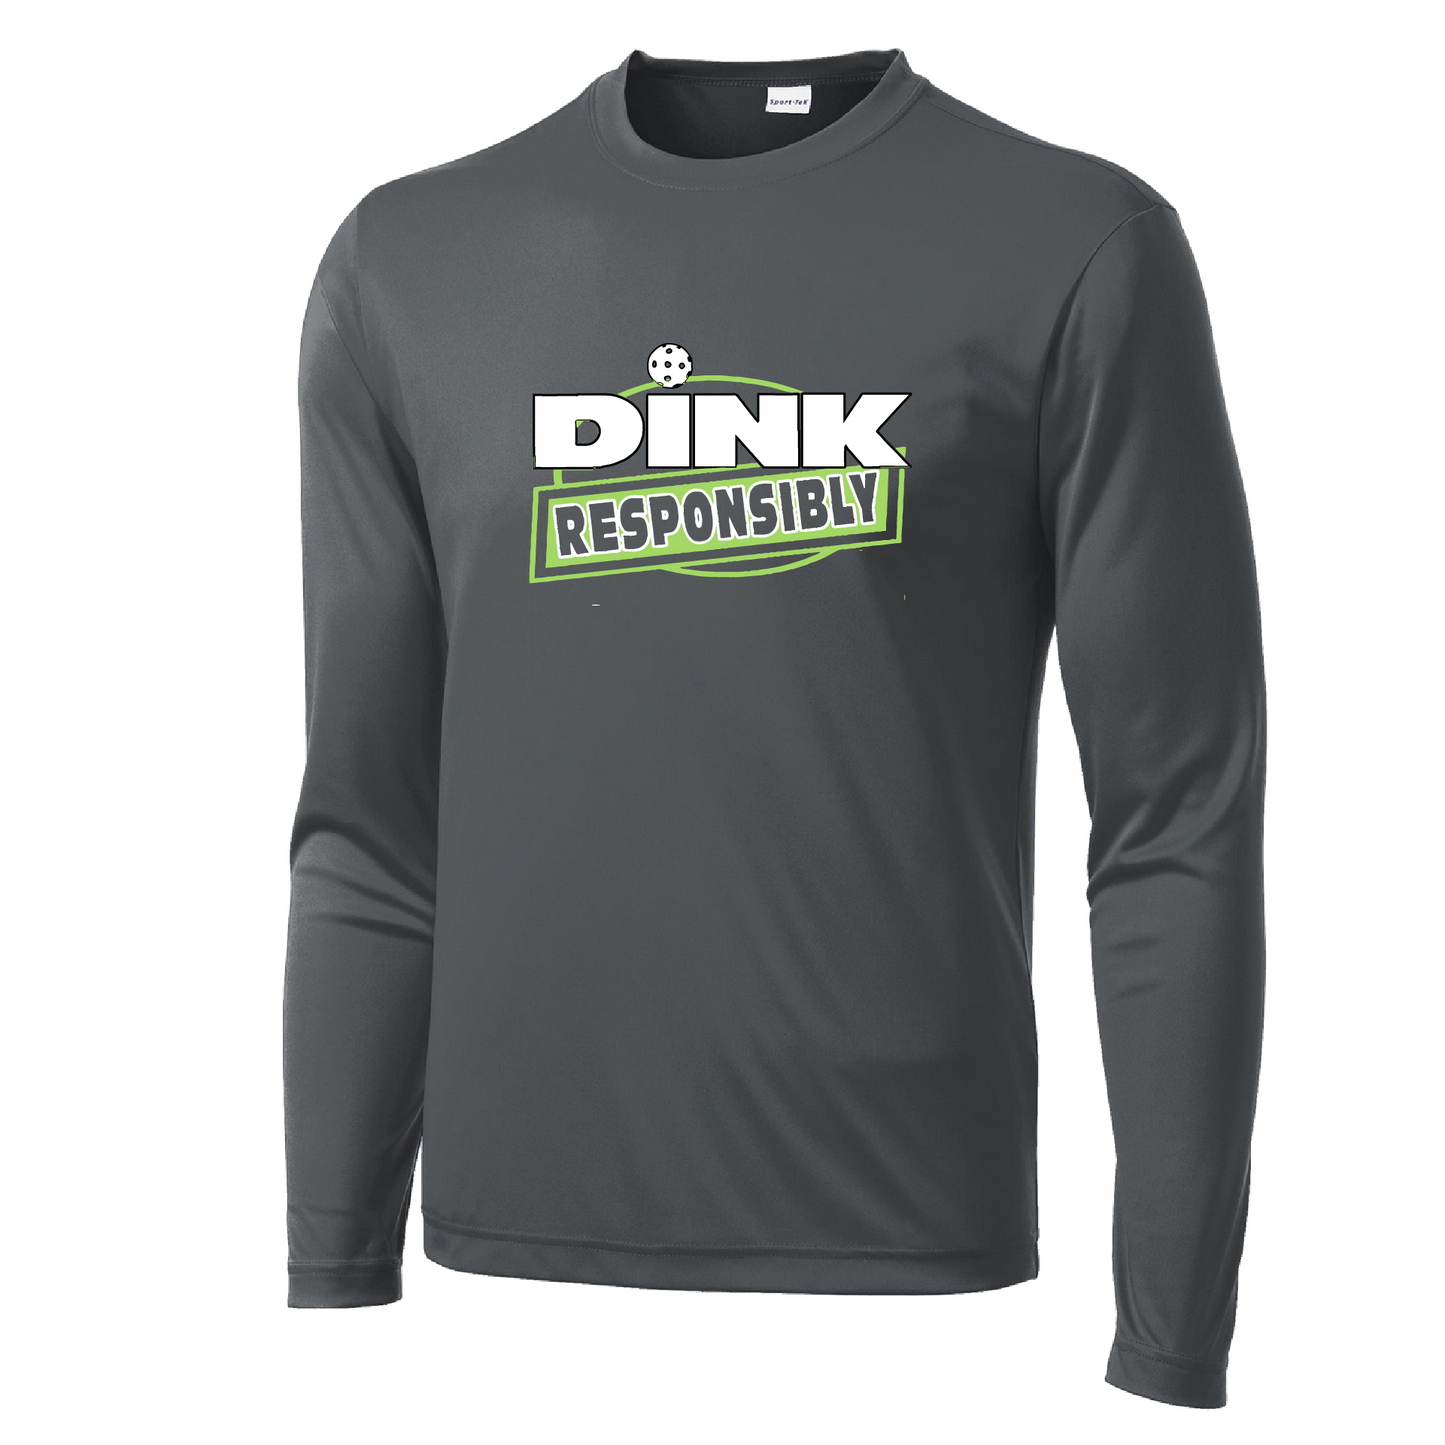 Pickleball Design: Dink Responsibly  Men's Style: Long Sleeve  Shirts are lightweight, roomy and highly breathable. These moisture-wicking shirts are designed for athletic performance. They feature PosiCharge technology to lock in color and prevent logos from fading. Removable tag and set-in sleeves for comfort